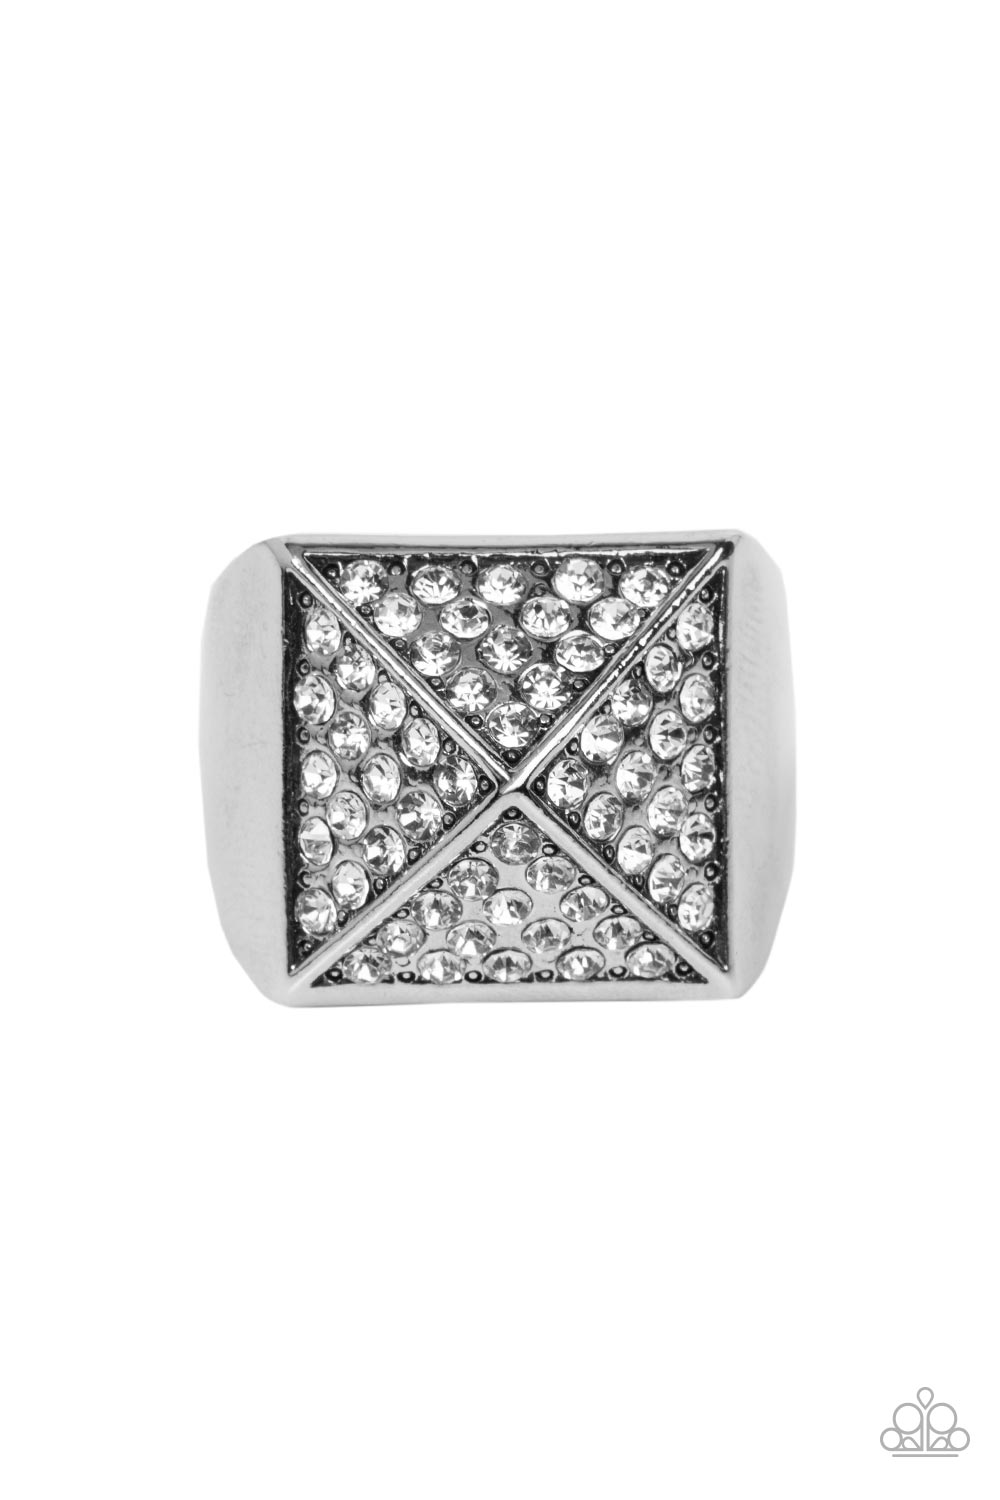 Encrusted in glassy white rhinestones, silver triangular frames build into a pyramidal centerpiece atop a thick silver band for a dauntless look. Features a stretchy band for a flexible fit.  Sold as one individual ring.